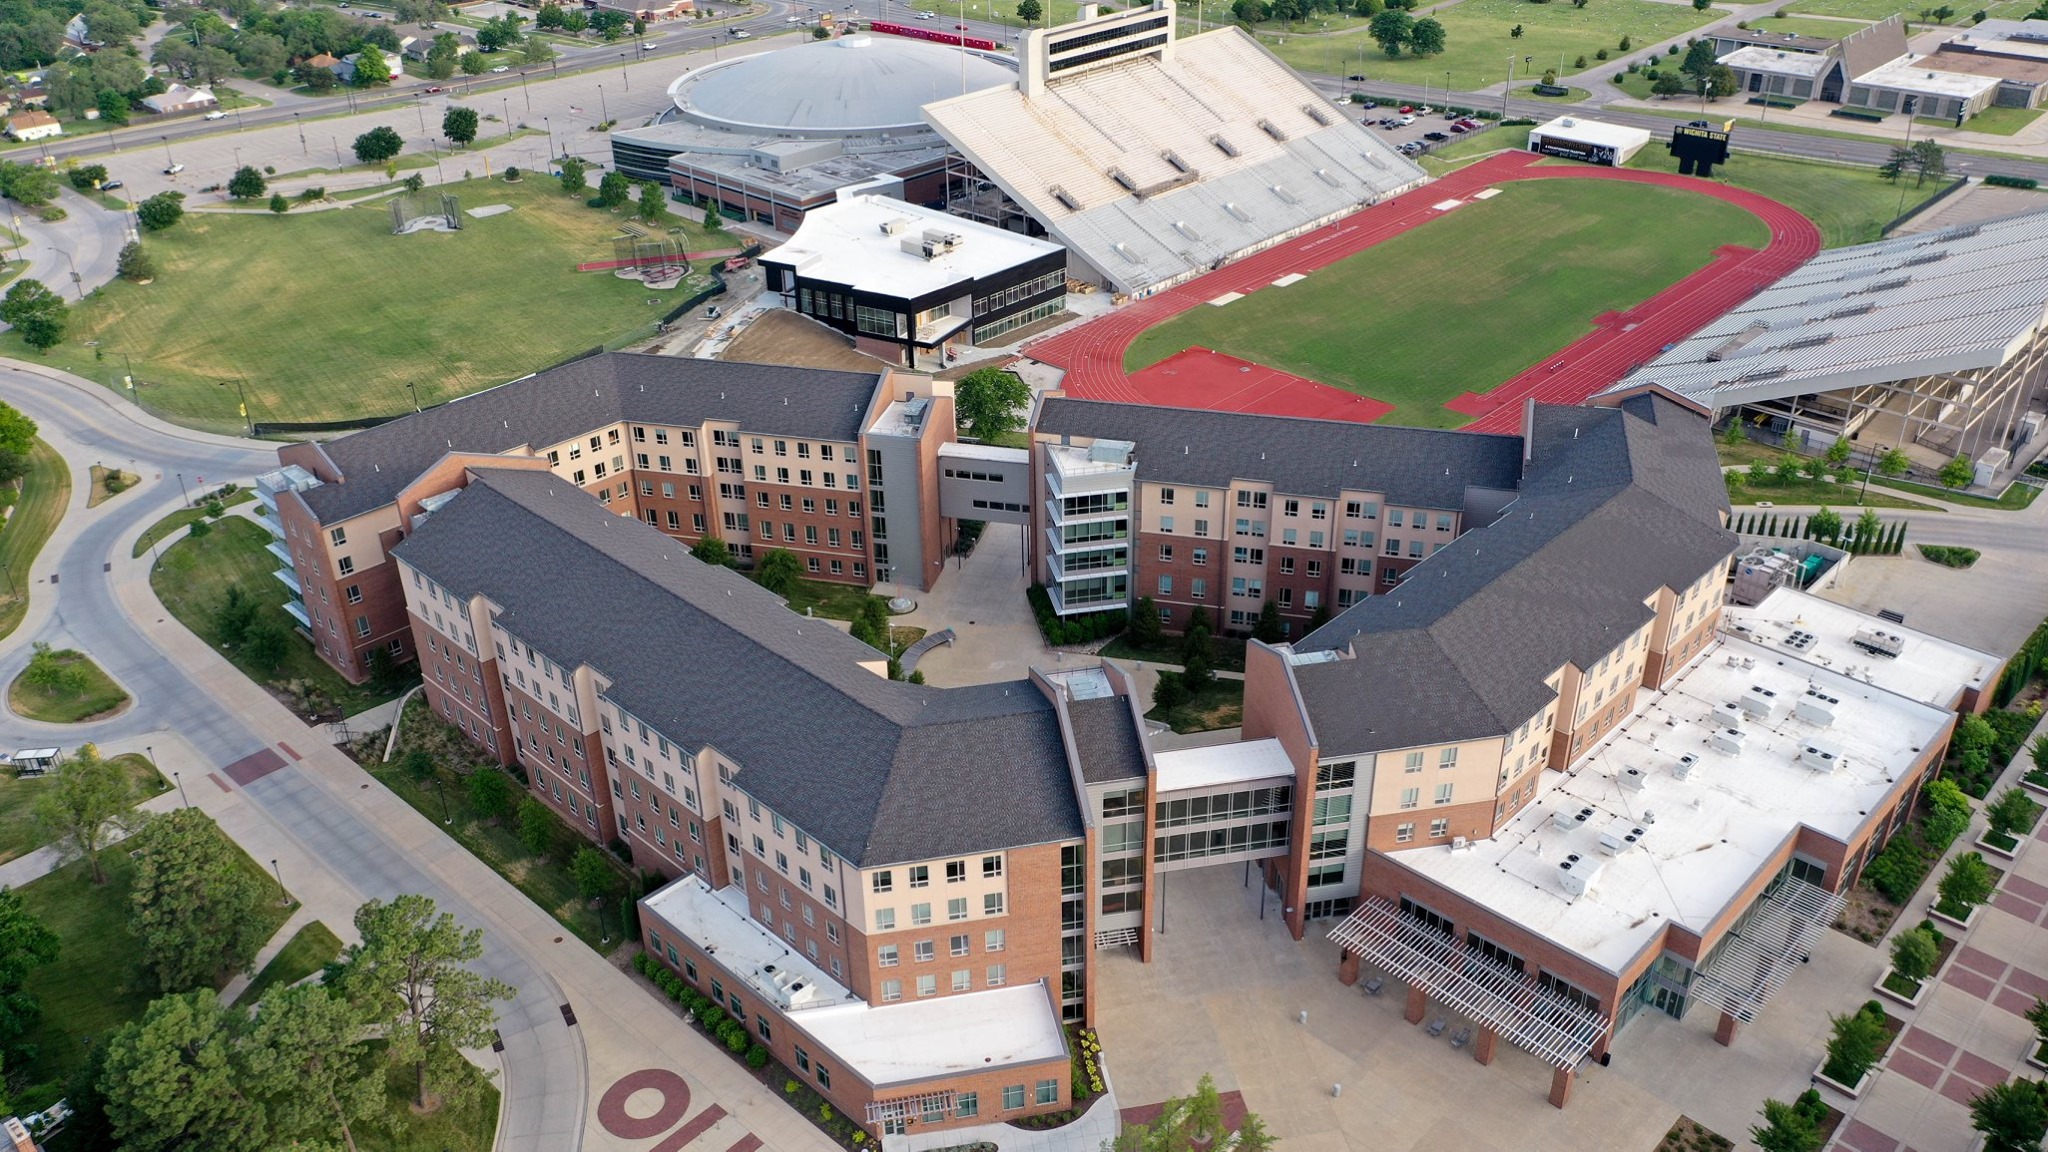 Photograph of Shocker Hall from a drone in flight. 